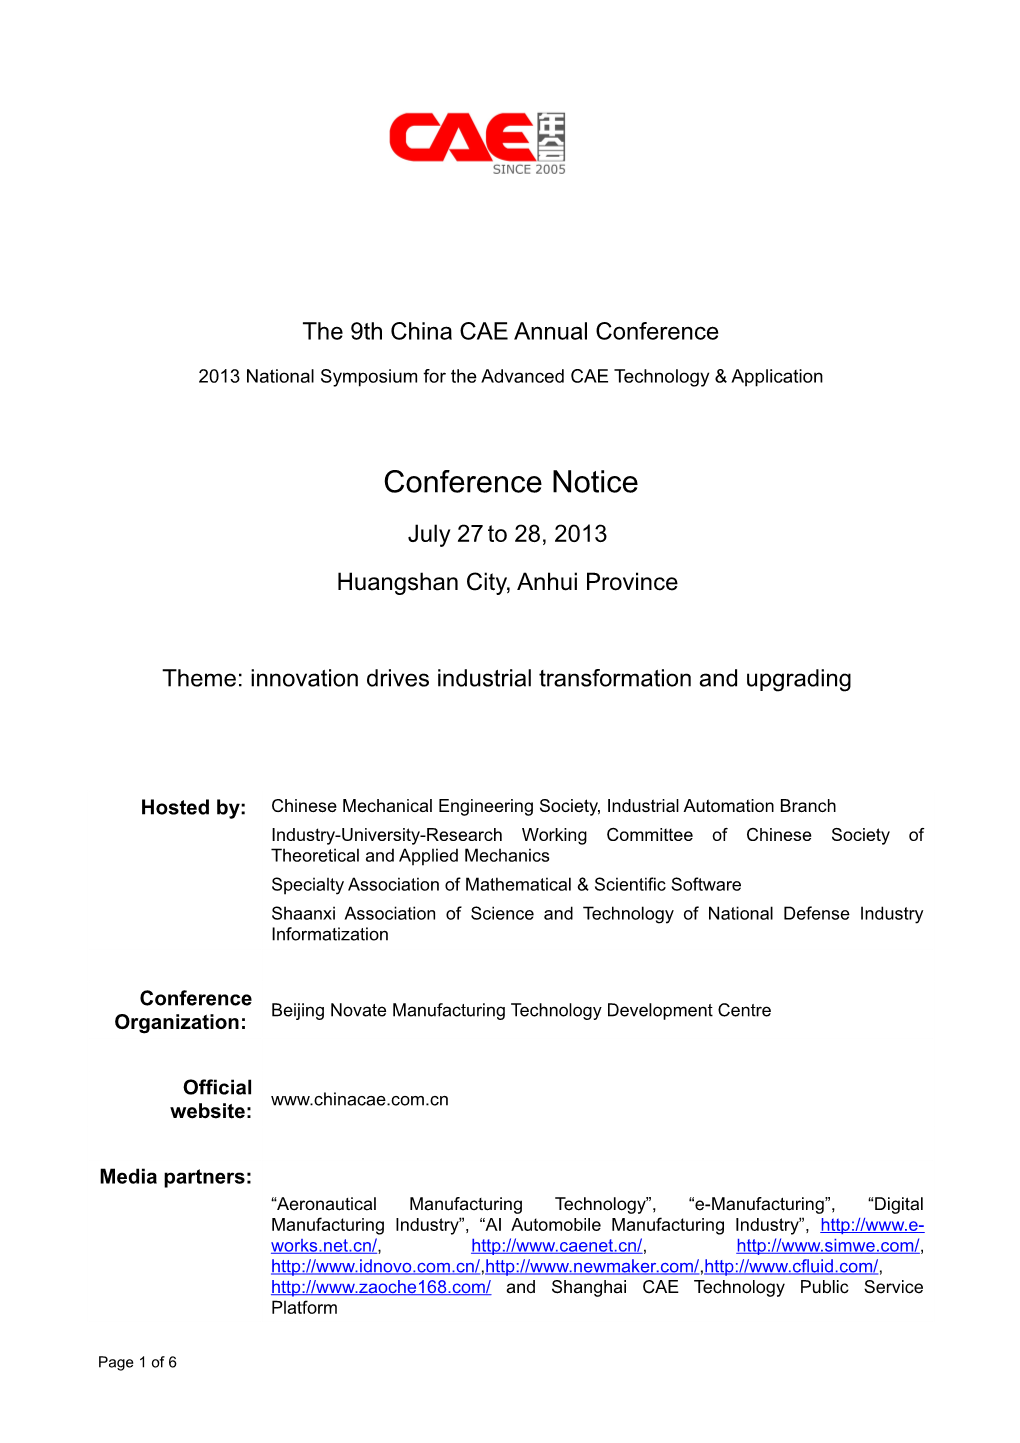 The 9Th China CAE Annual Conference